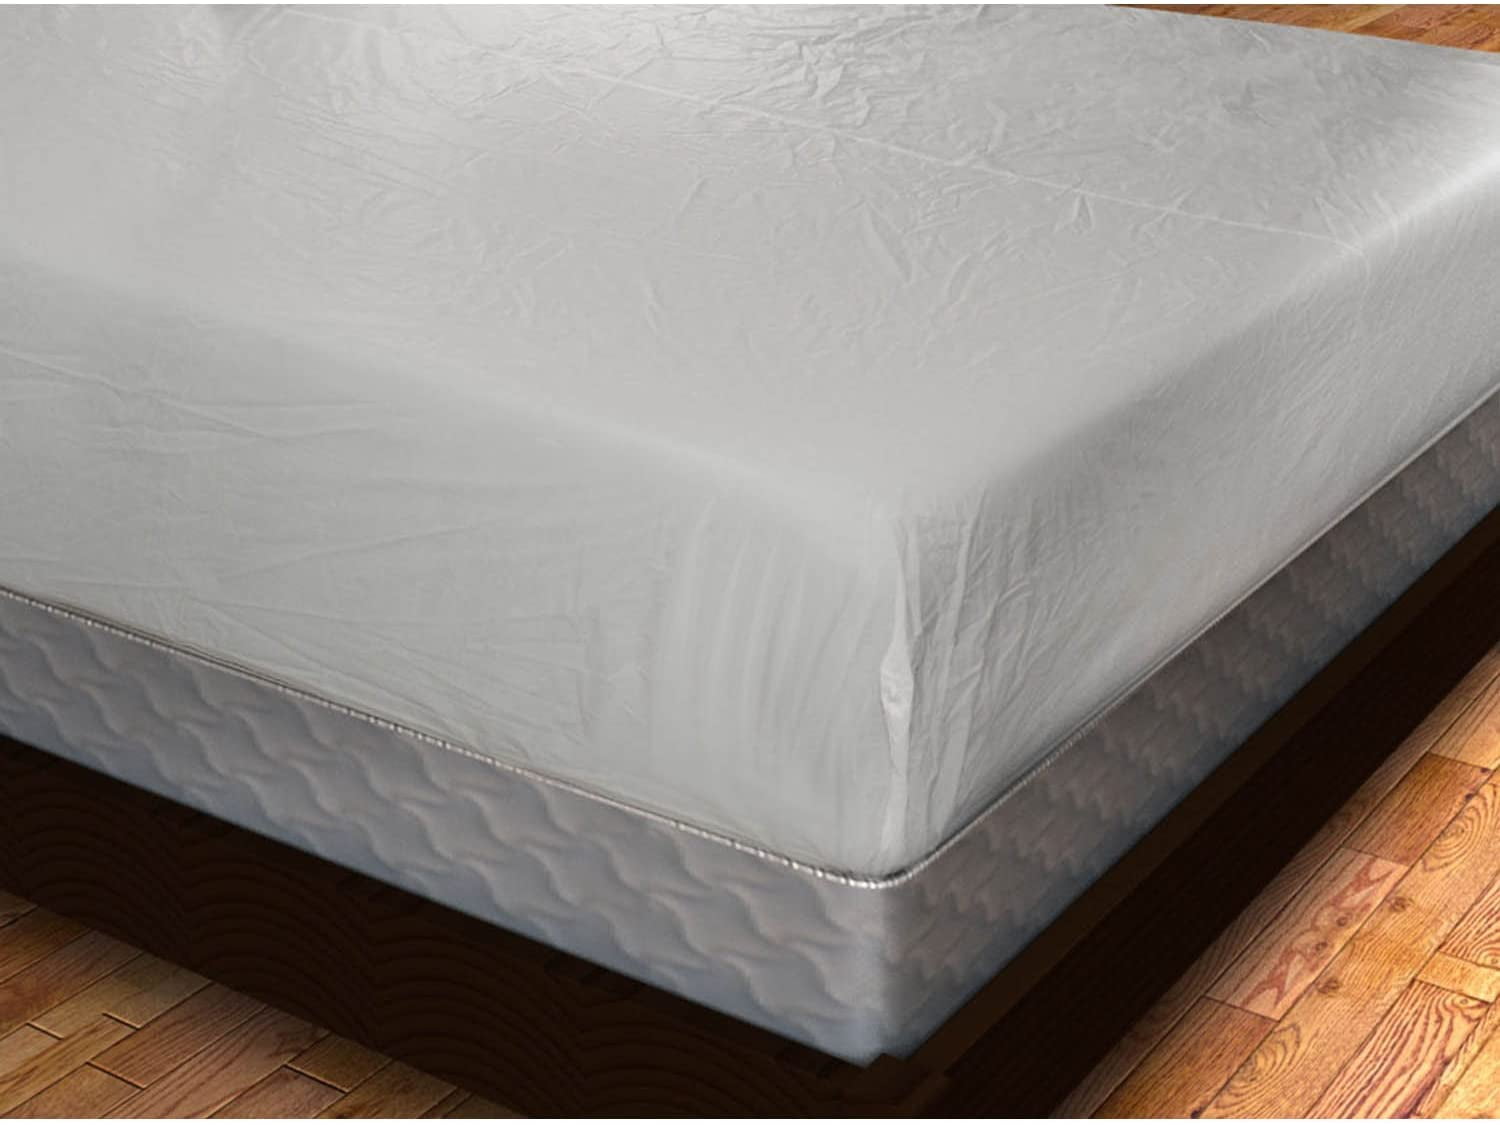 waterproof protective mattress cover